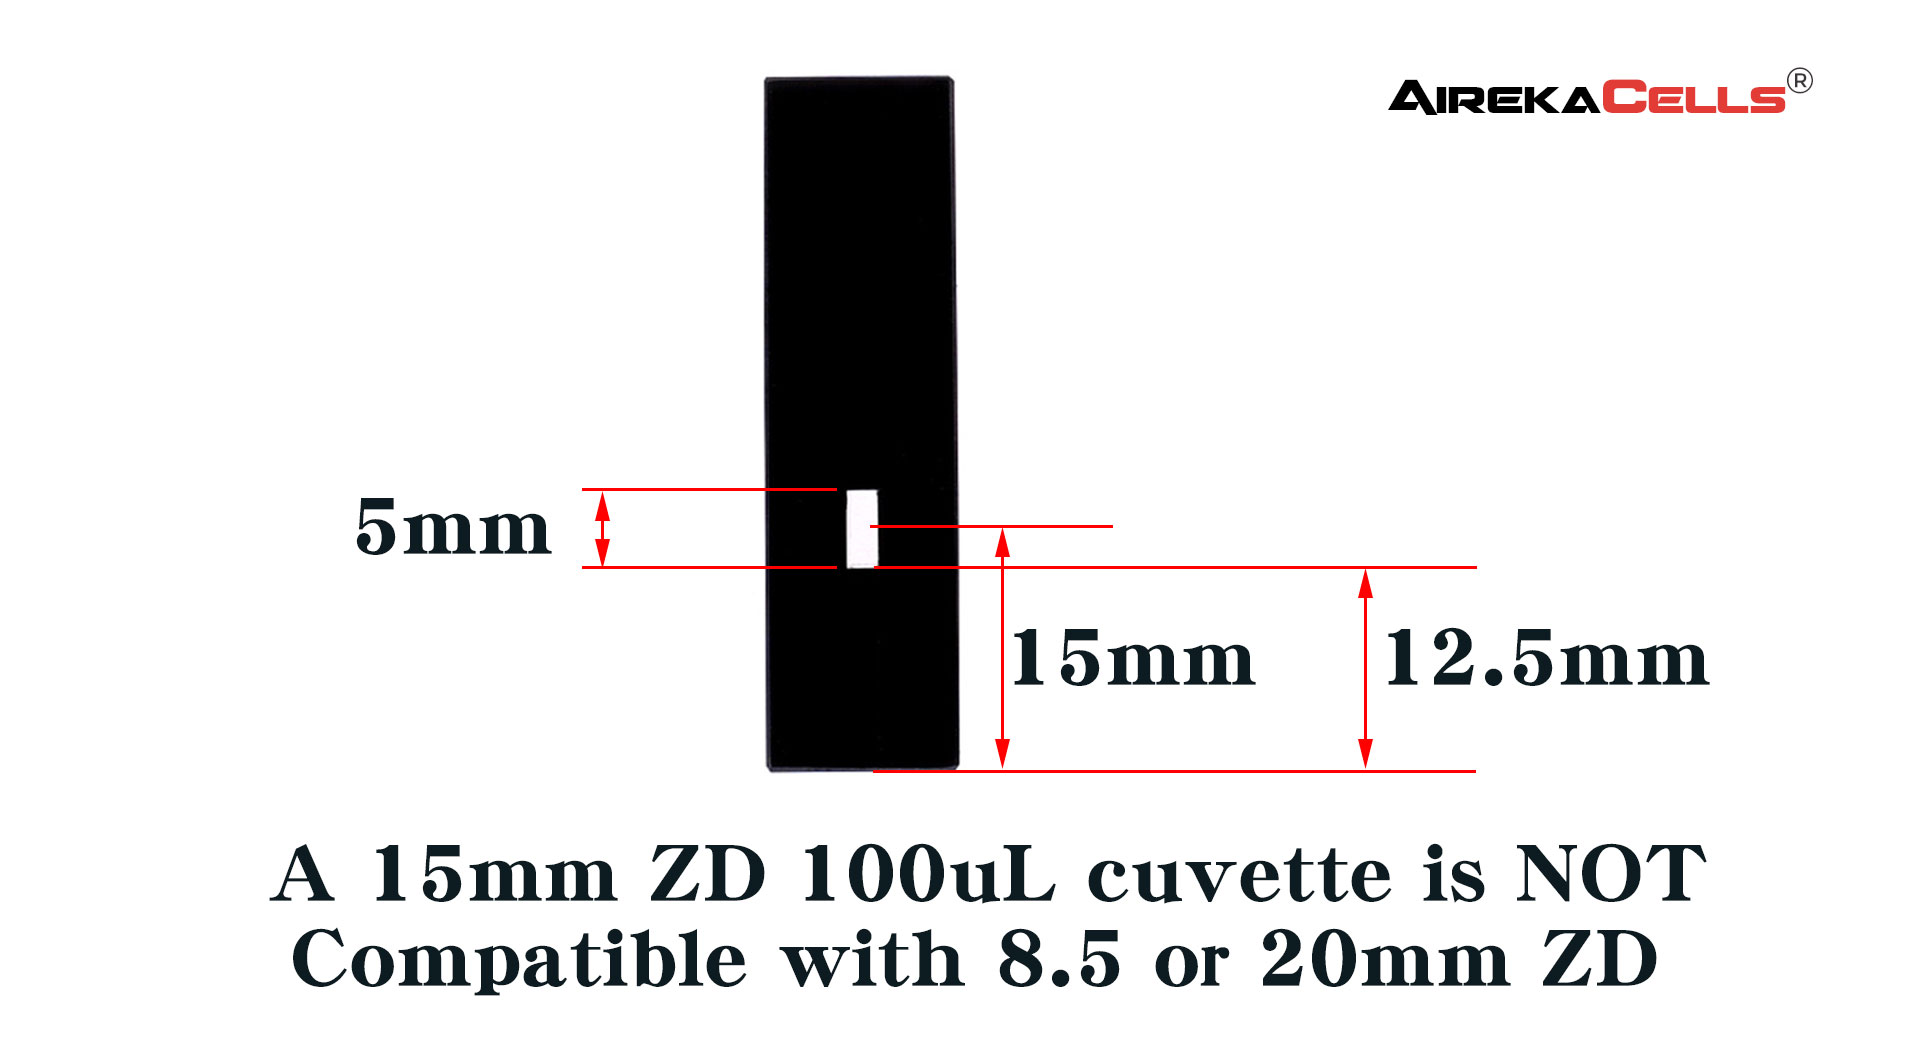 A 15mm ZD 100uL cuvette is NOT Compatible with 8.5 or 20mm ZD 